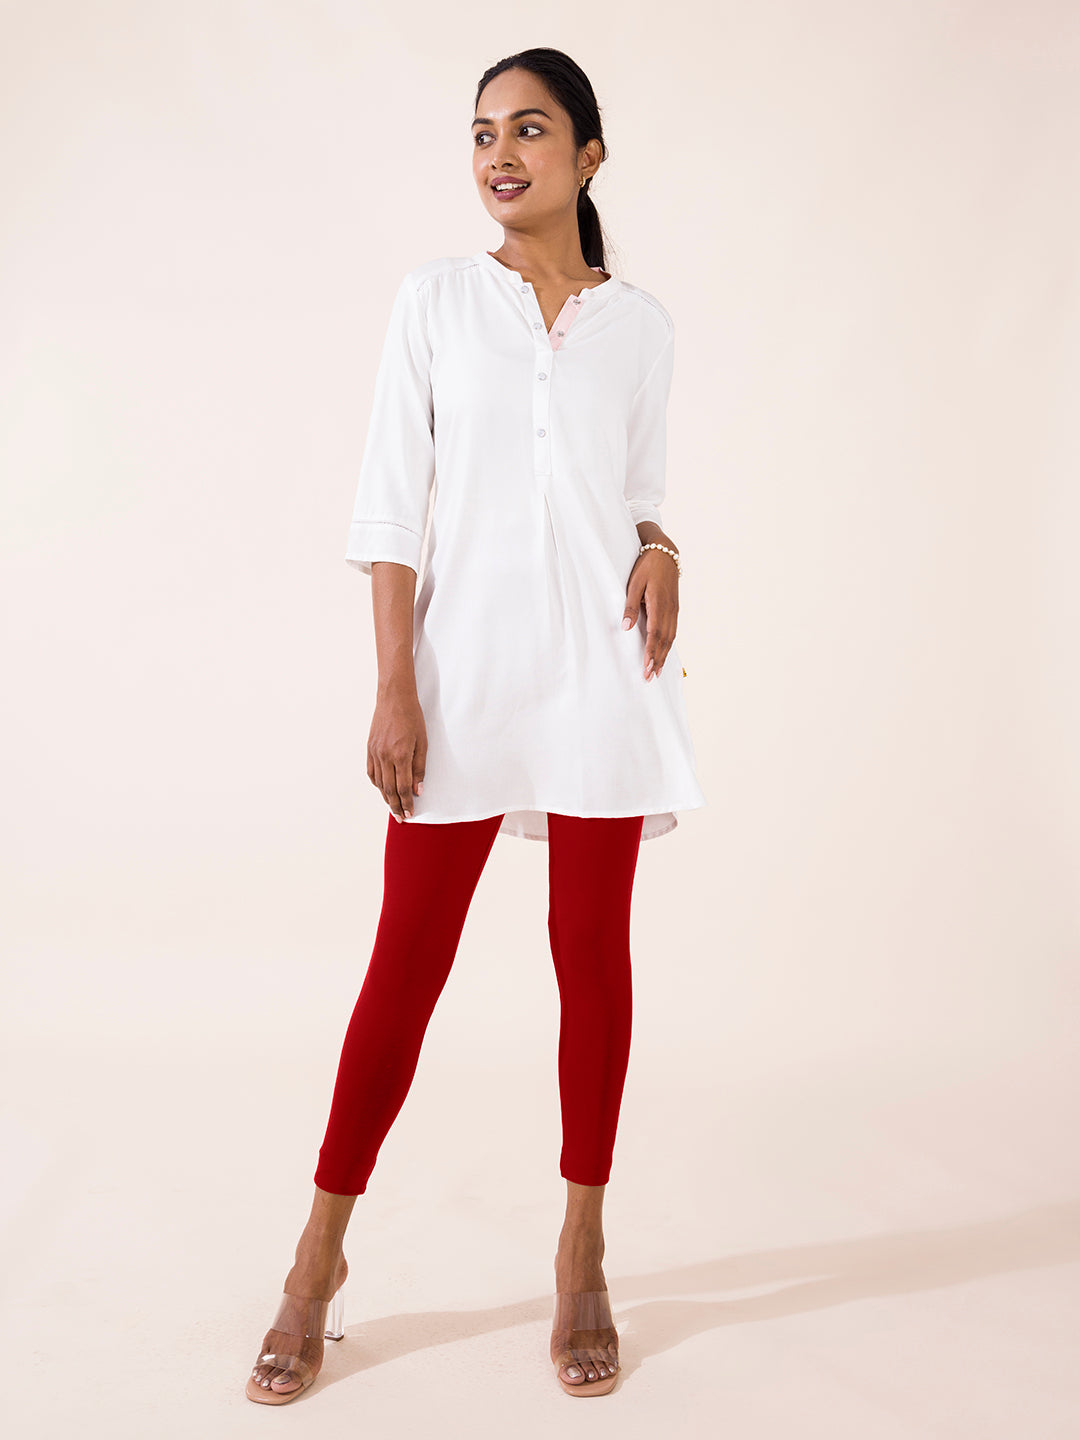 Buy Go Colors Kurti Pants Online In India At Best Price Offers | Tata CLiQ